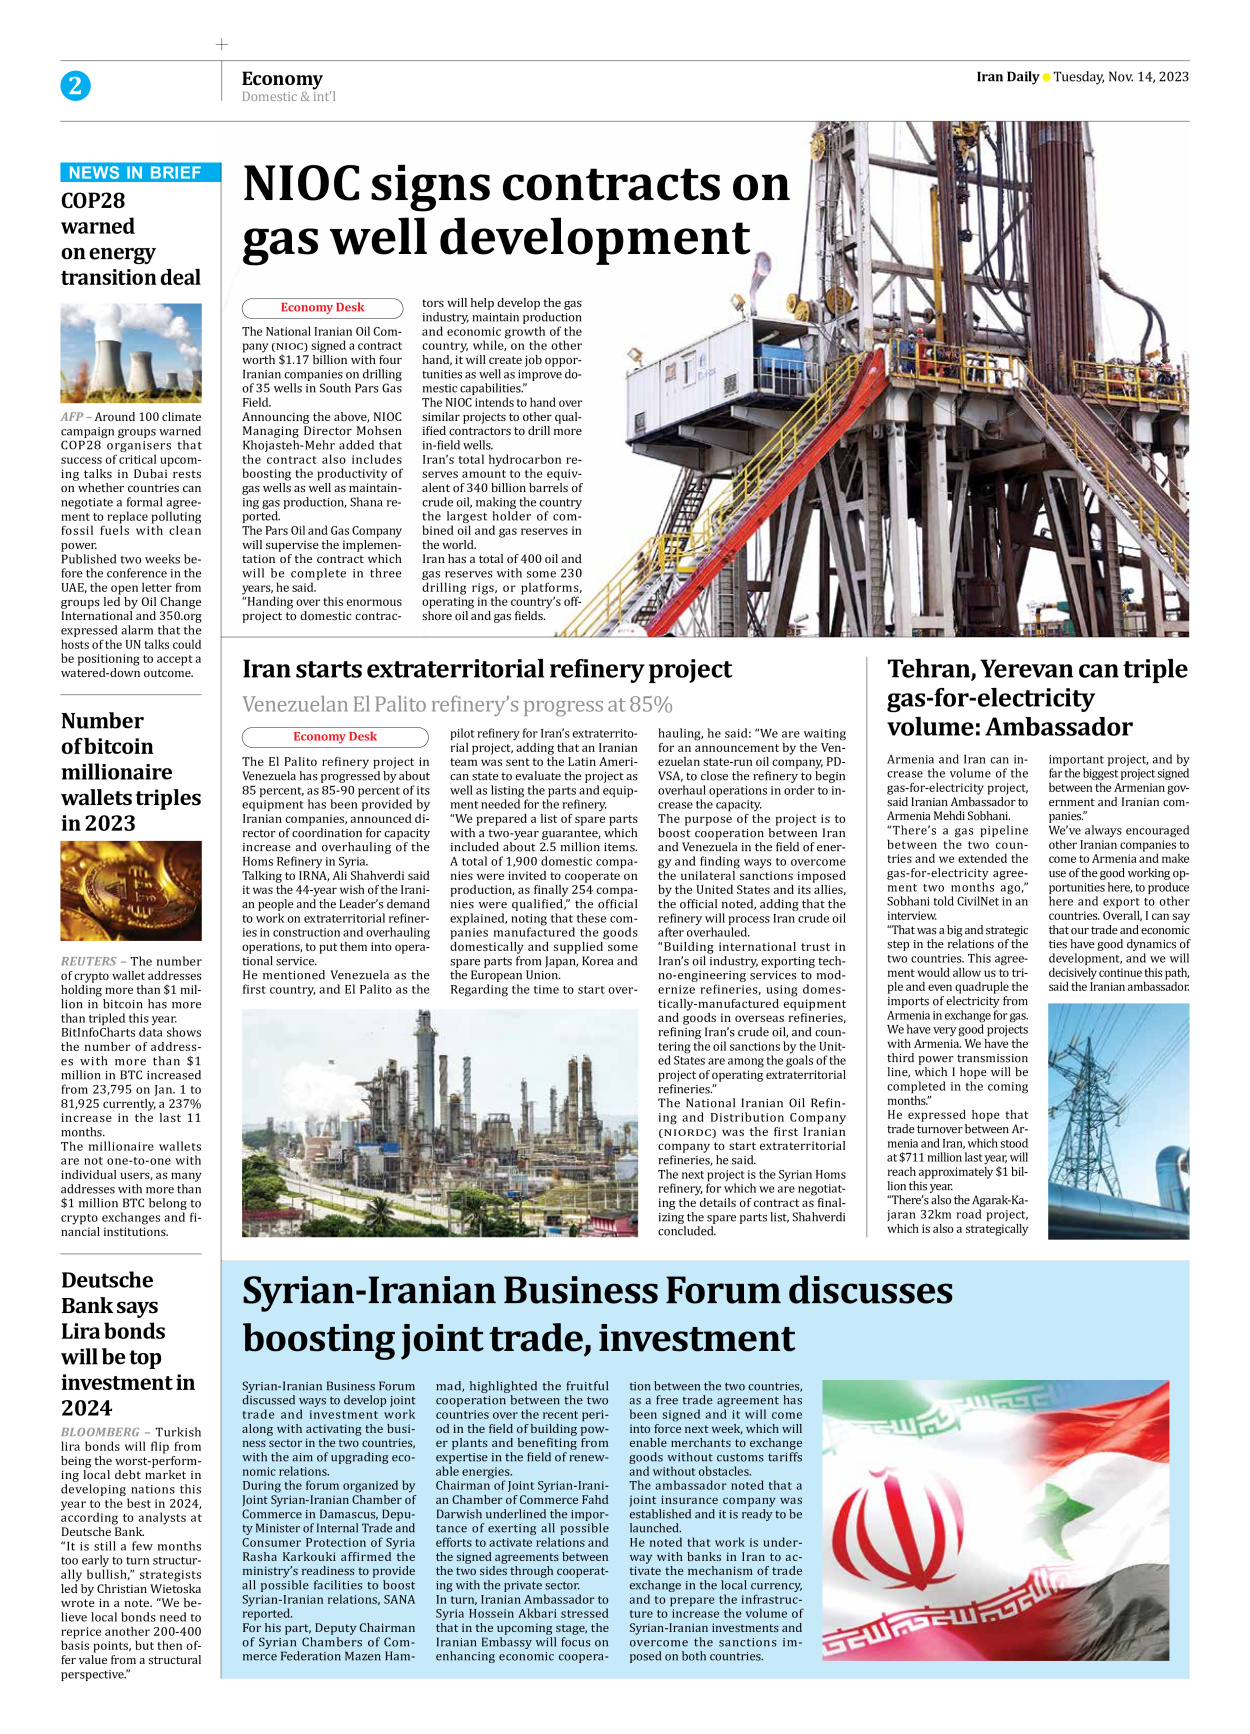 Iran Daily - Number Seven Thousand Four Hundred and Thirty Four - 14 November 2023 - Page 2